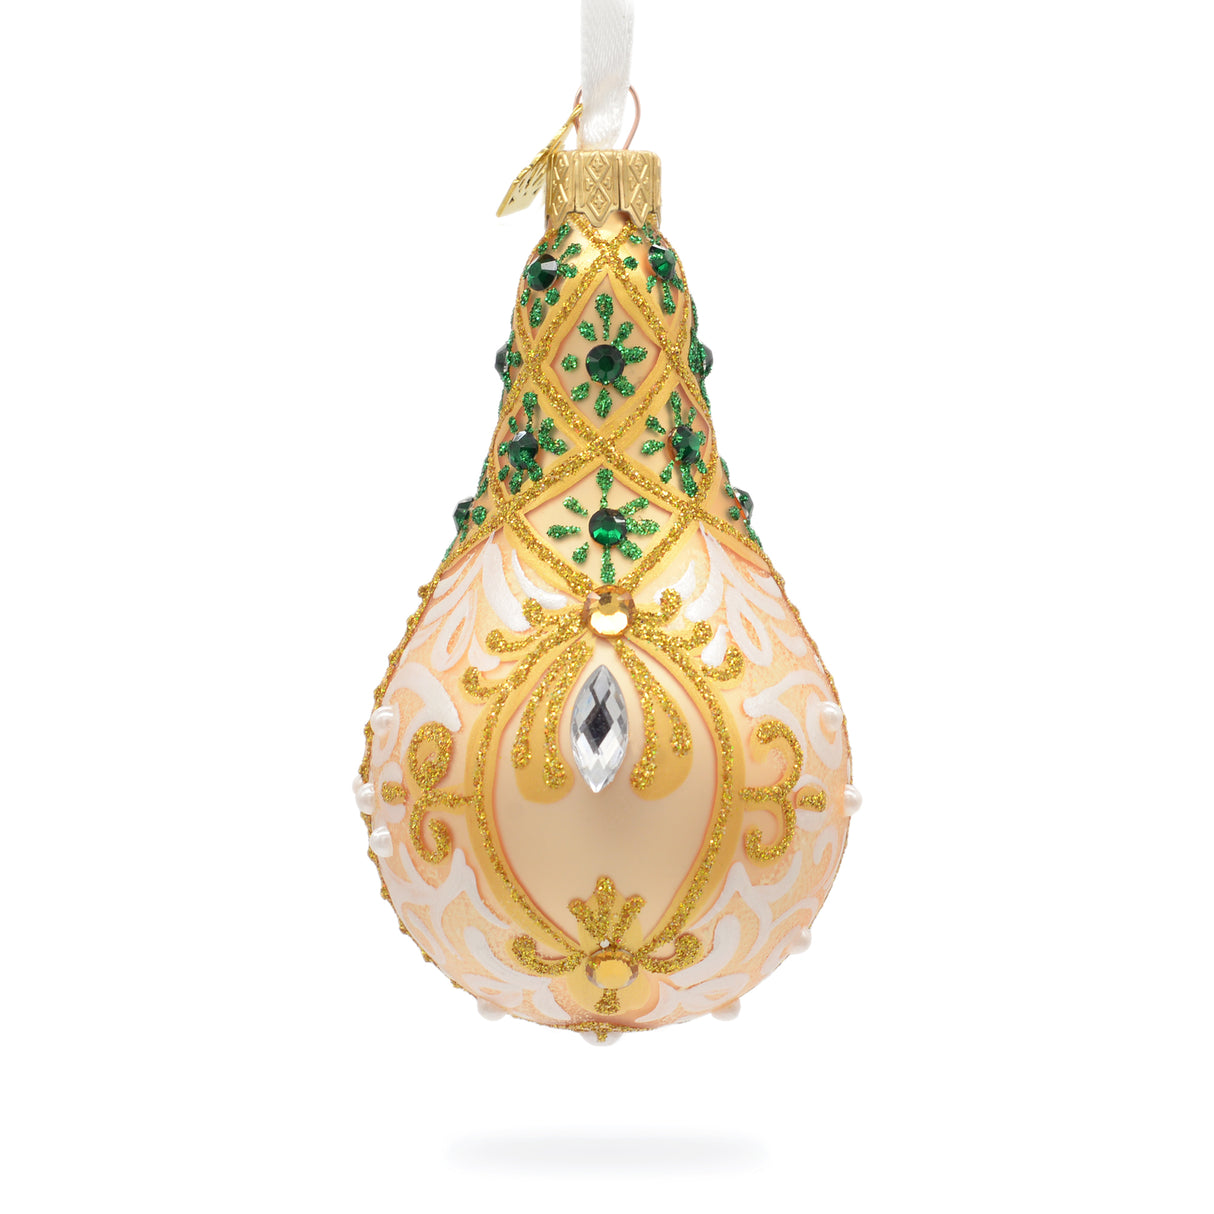 Glass Swirls on Champagne Bejeweled Glass Waterdrop Ornament in Gold color